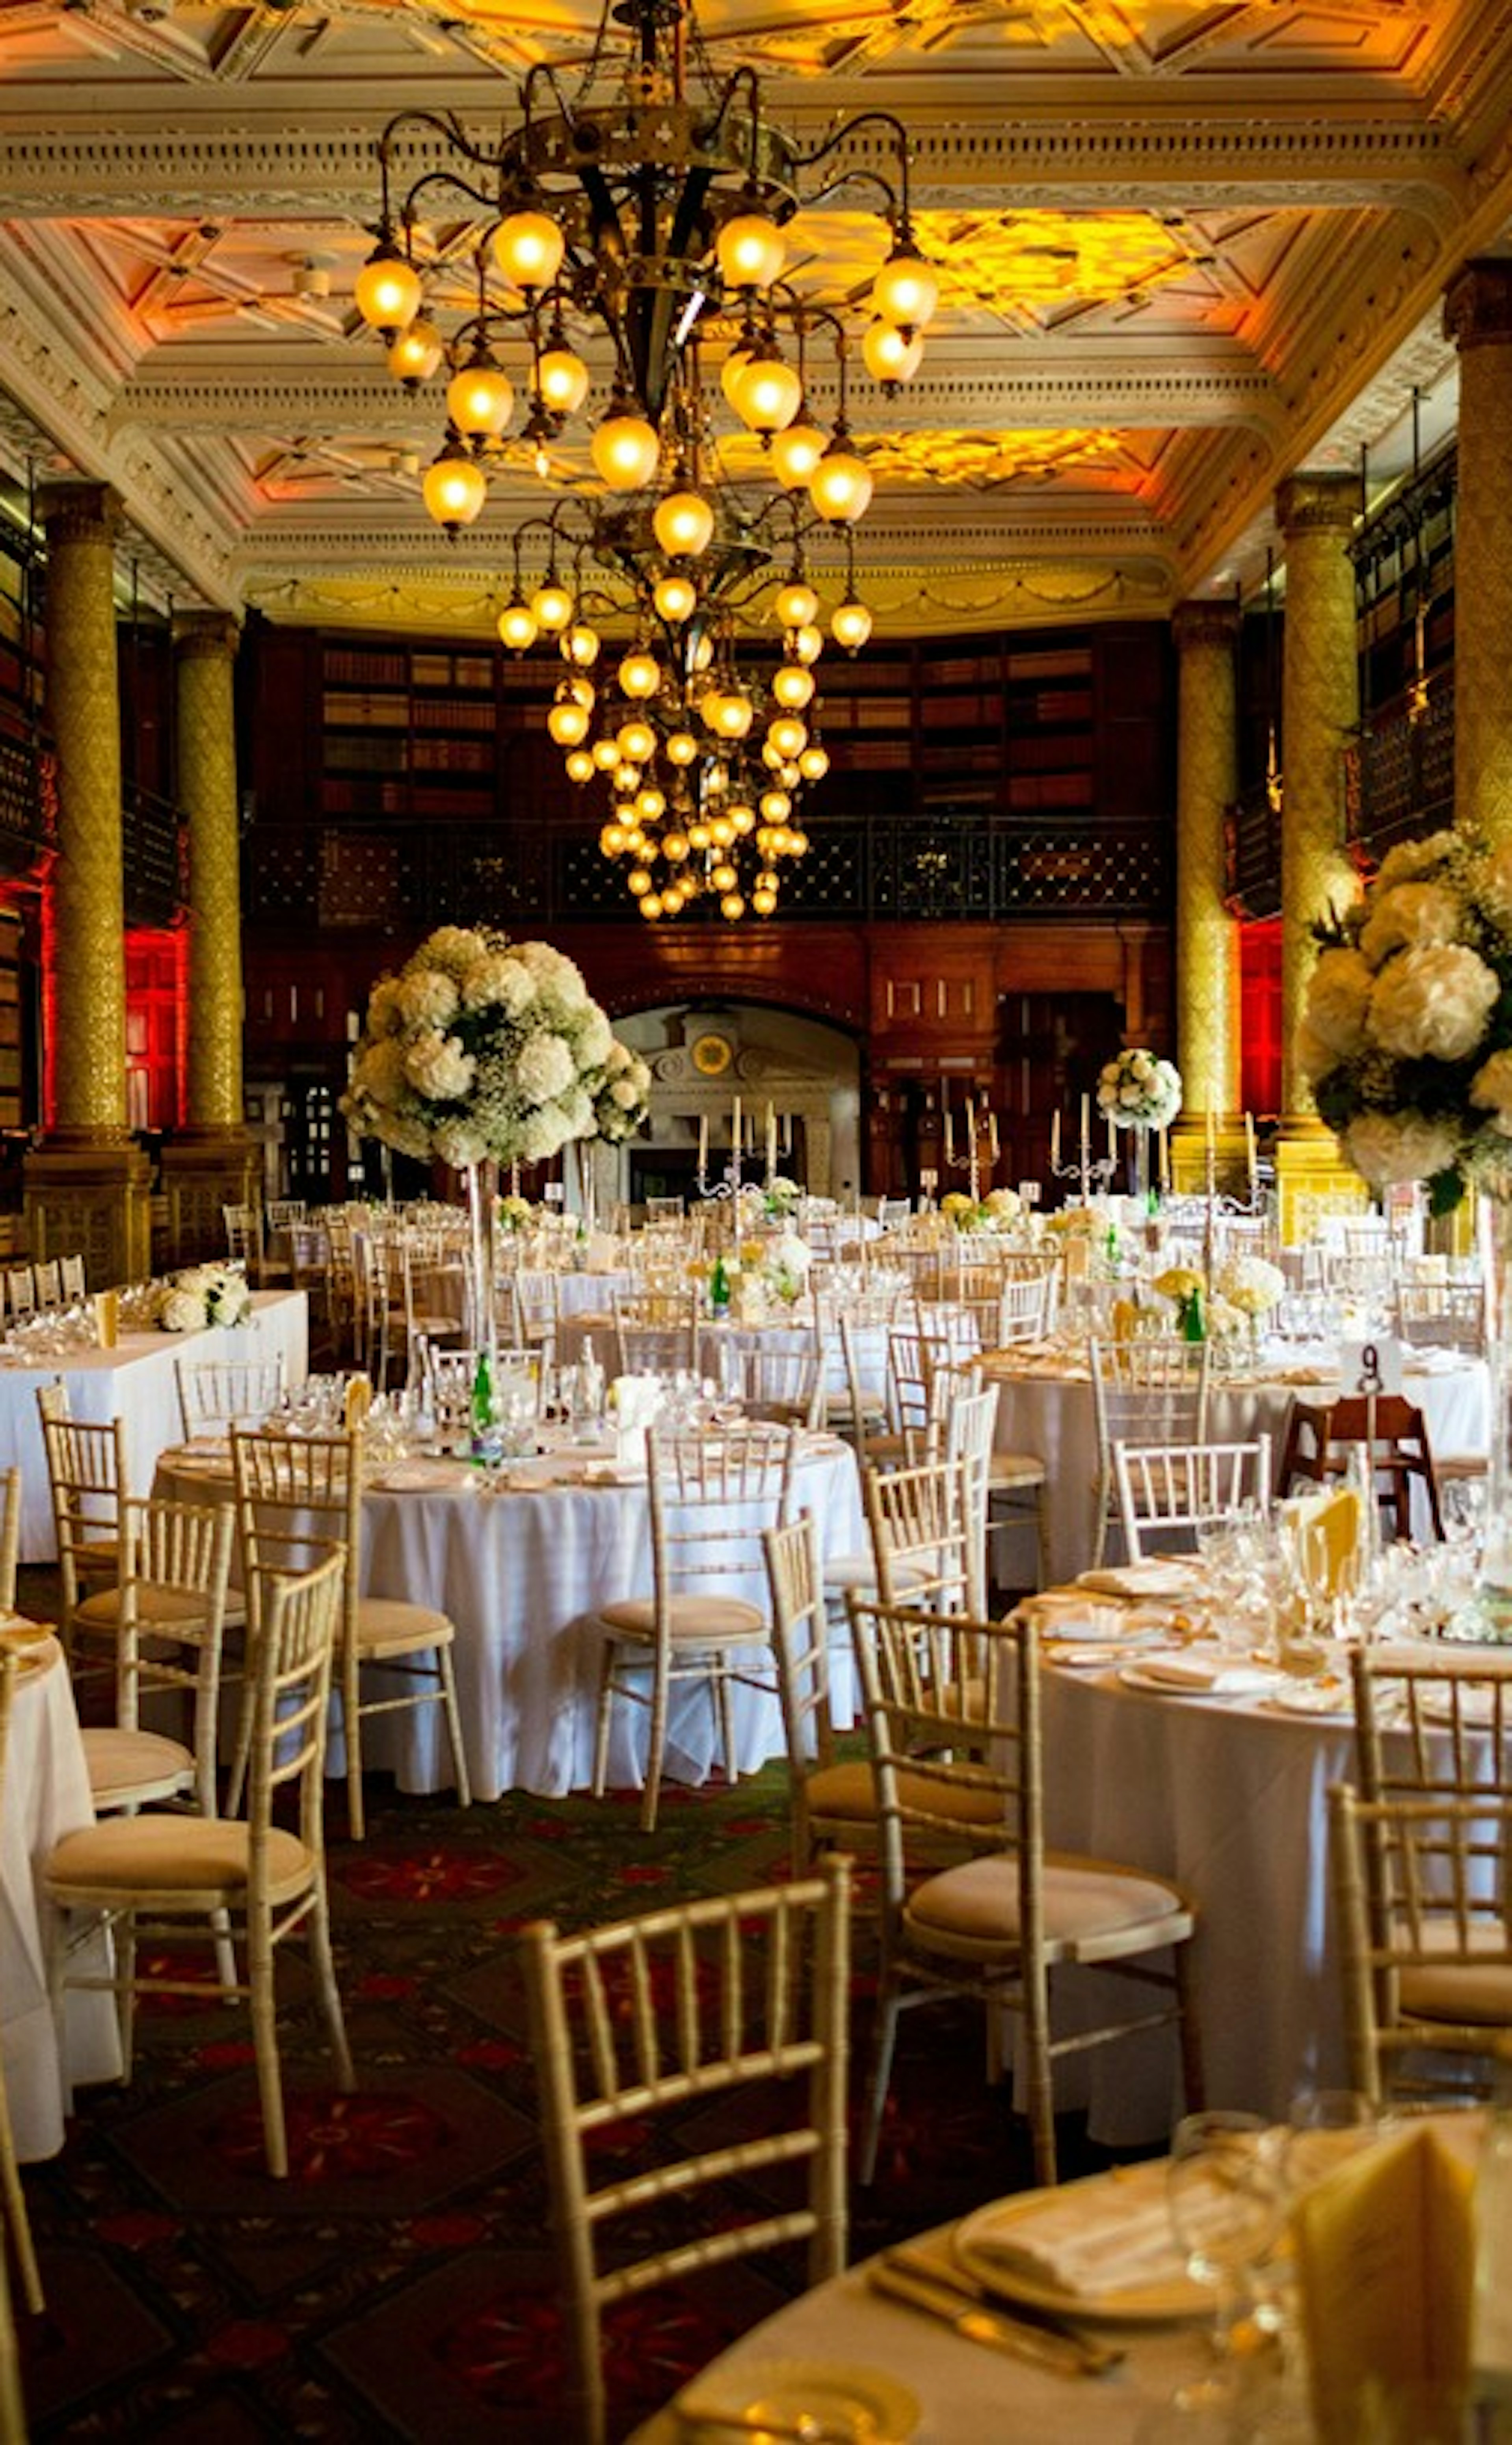 Wedding Reception Venues - The Royal Horseguards Hotel and One Whitehall Place